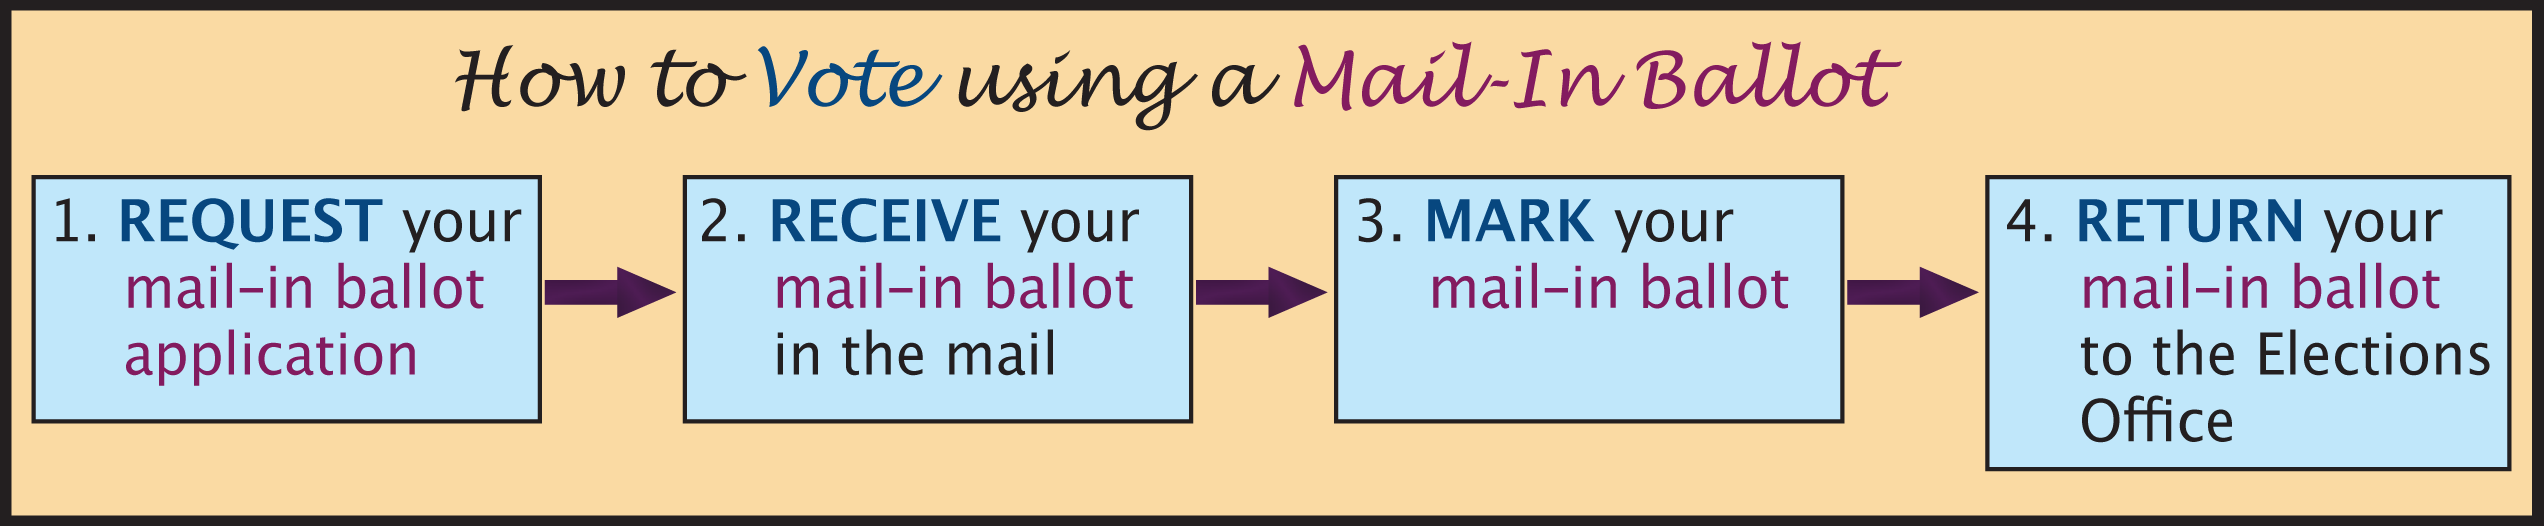 How to Vote Using a Mail-In Ballot